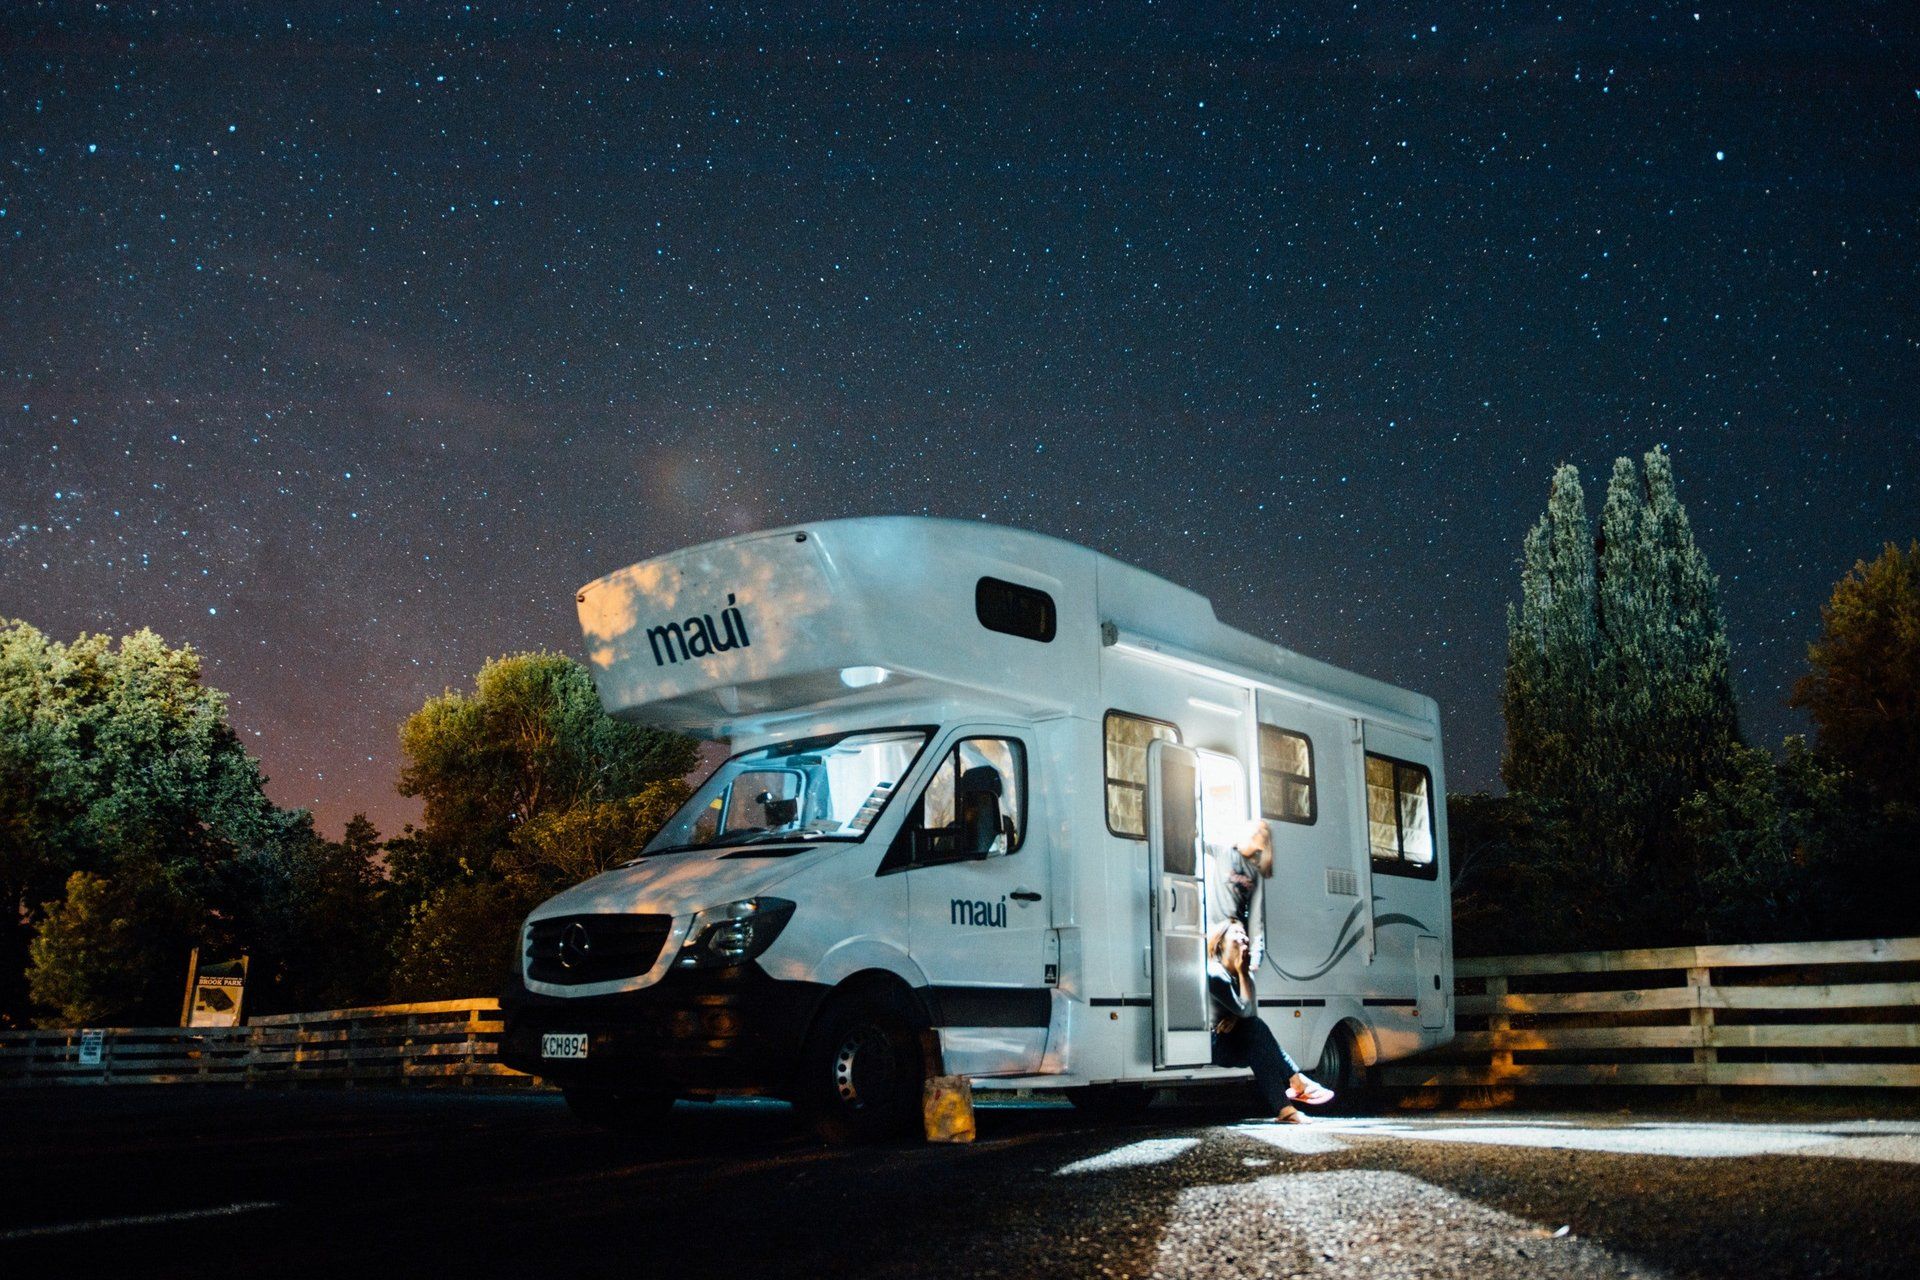 Couple sitting in the doorway of the RV gazing at the Stars